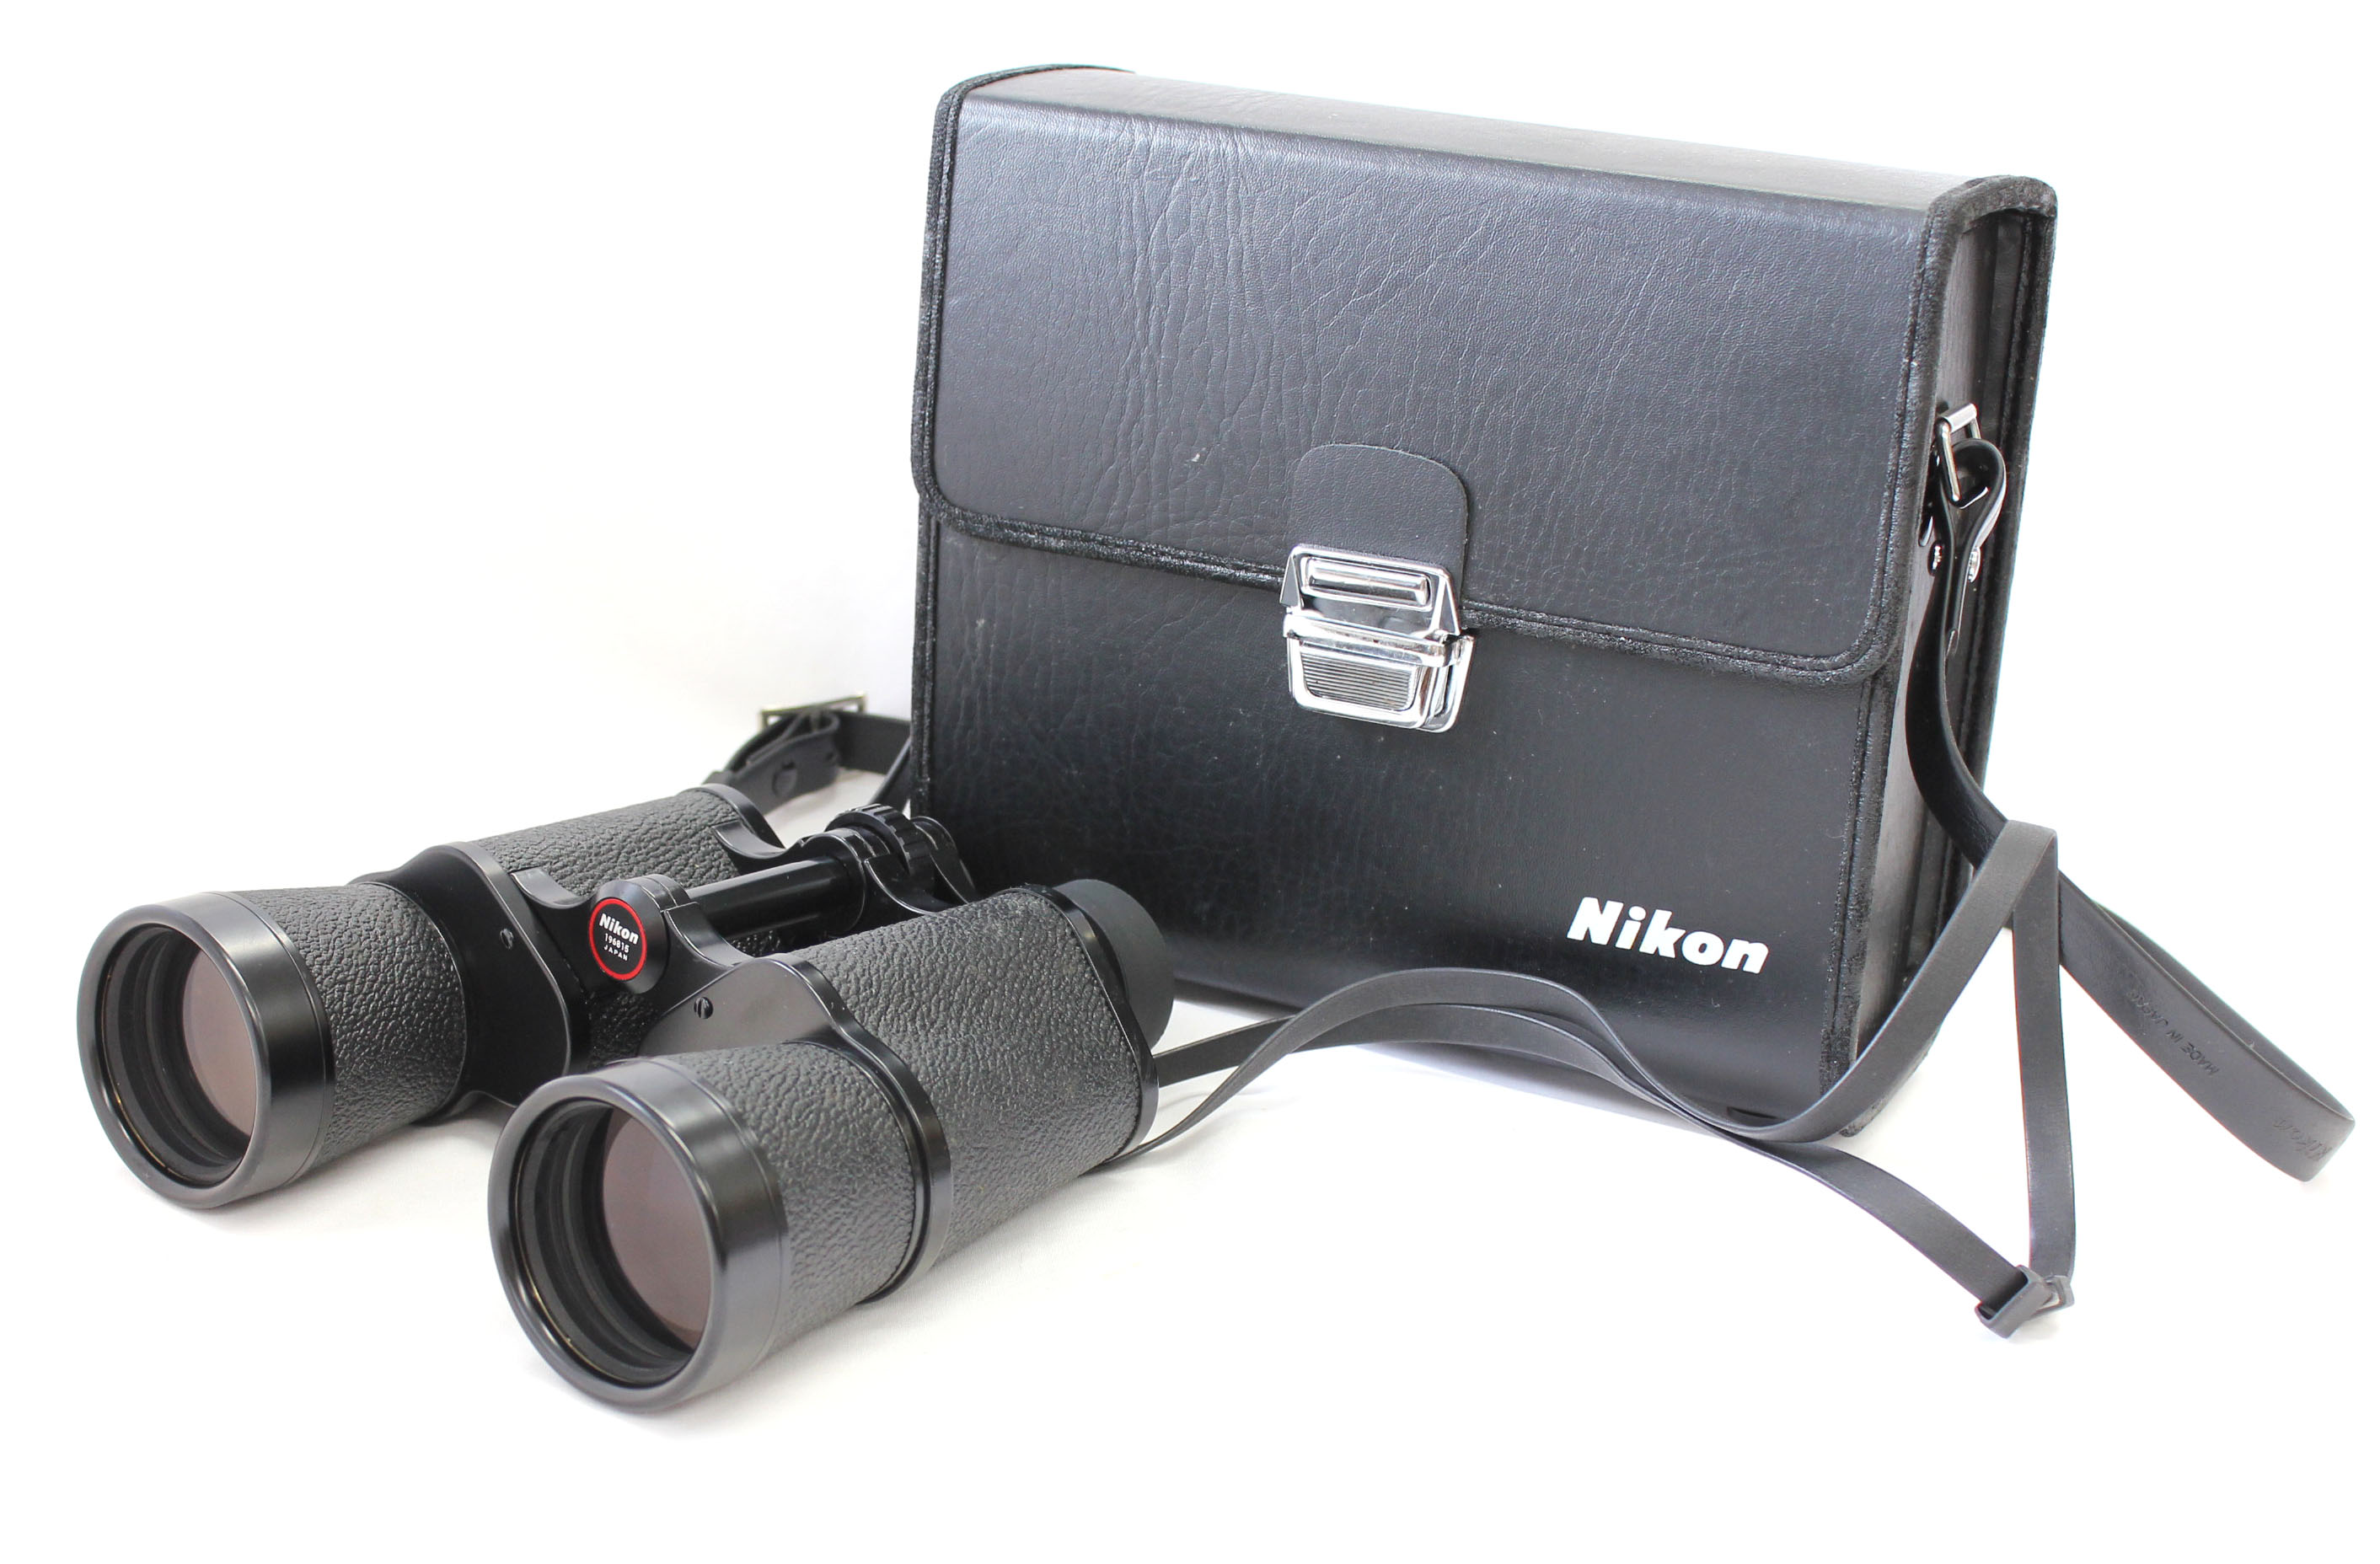  Nikon 7x50 7.3° 7.3 Degree Binoculars with Strap and Case from Japan Photo 0